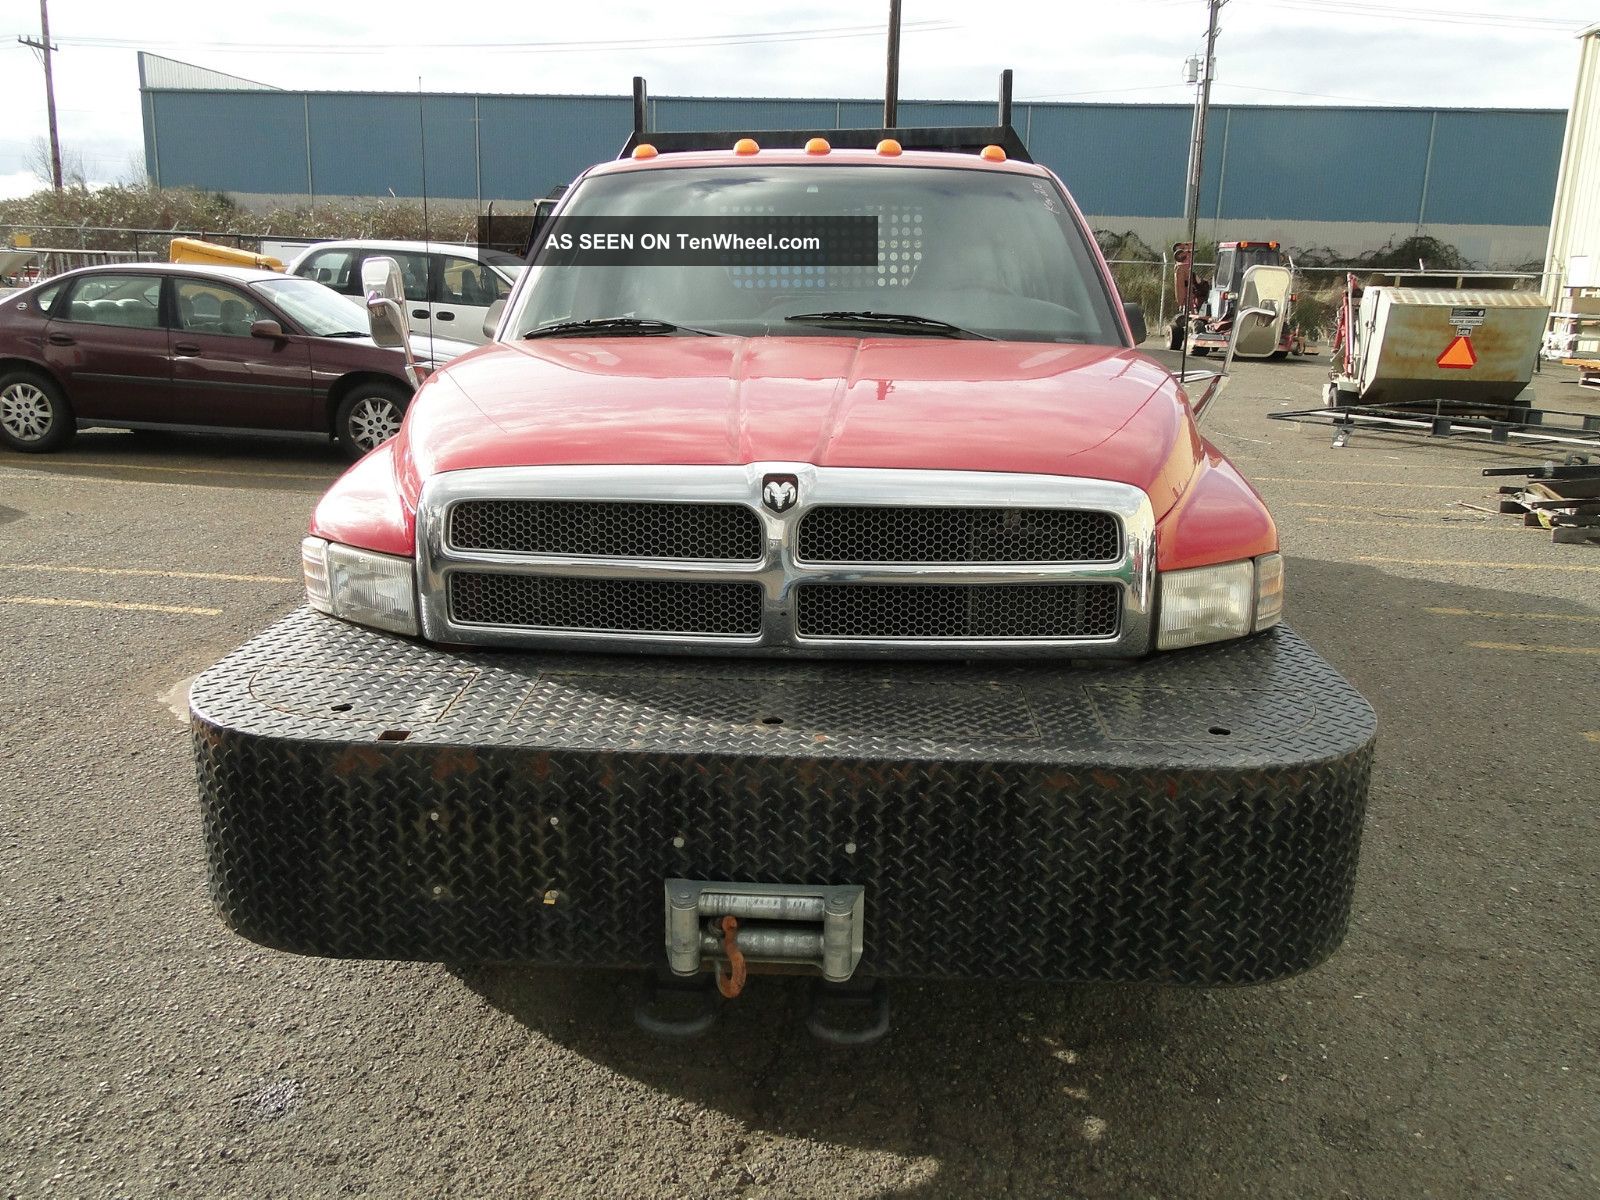 2000 Dodge Ram 3500 Flat Bed Quad Cab 4wd 2000 Dodge Ram 3500 Diesel Dually Towing Capacity